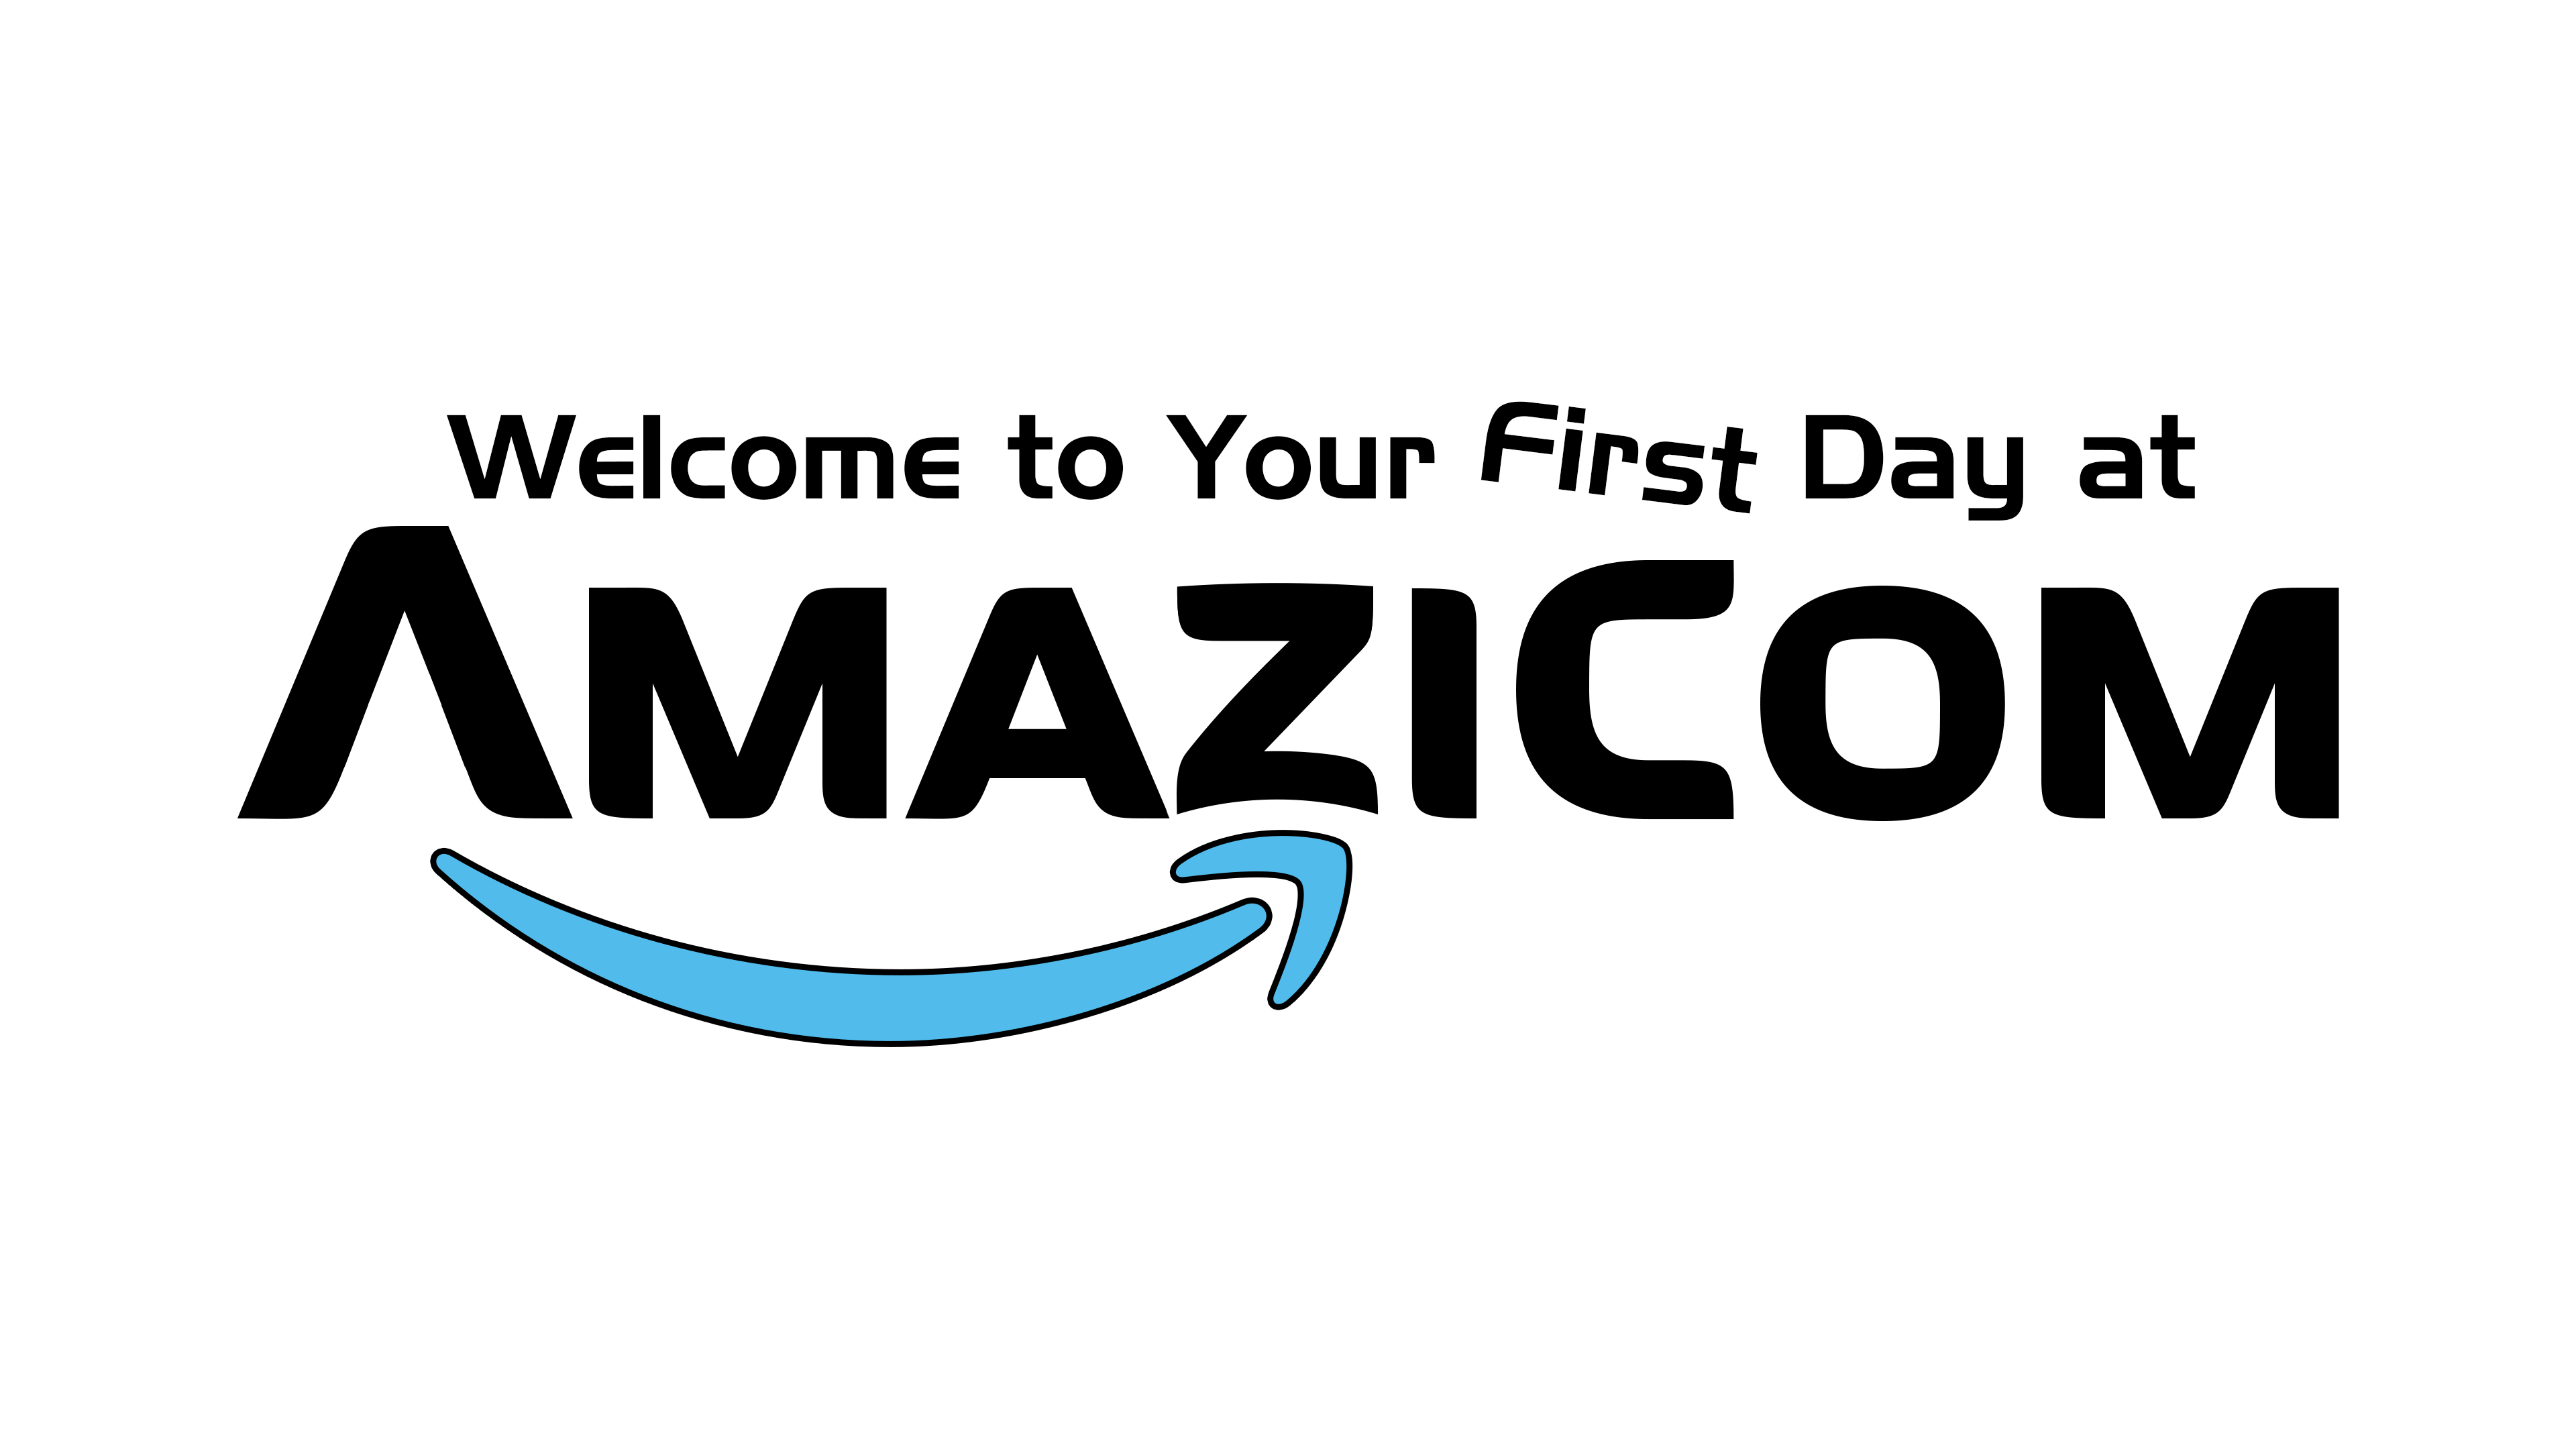 Welcome to your First Day at Amazicom